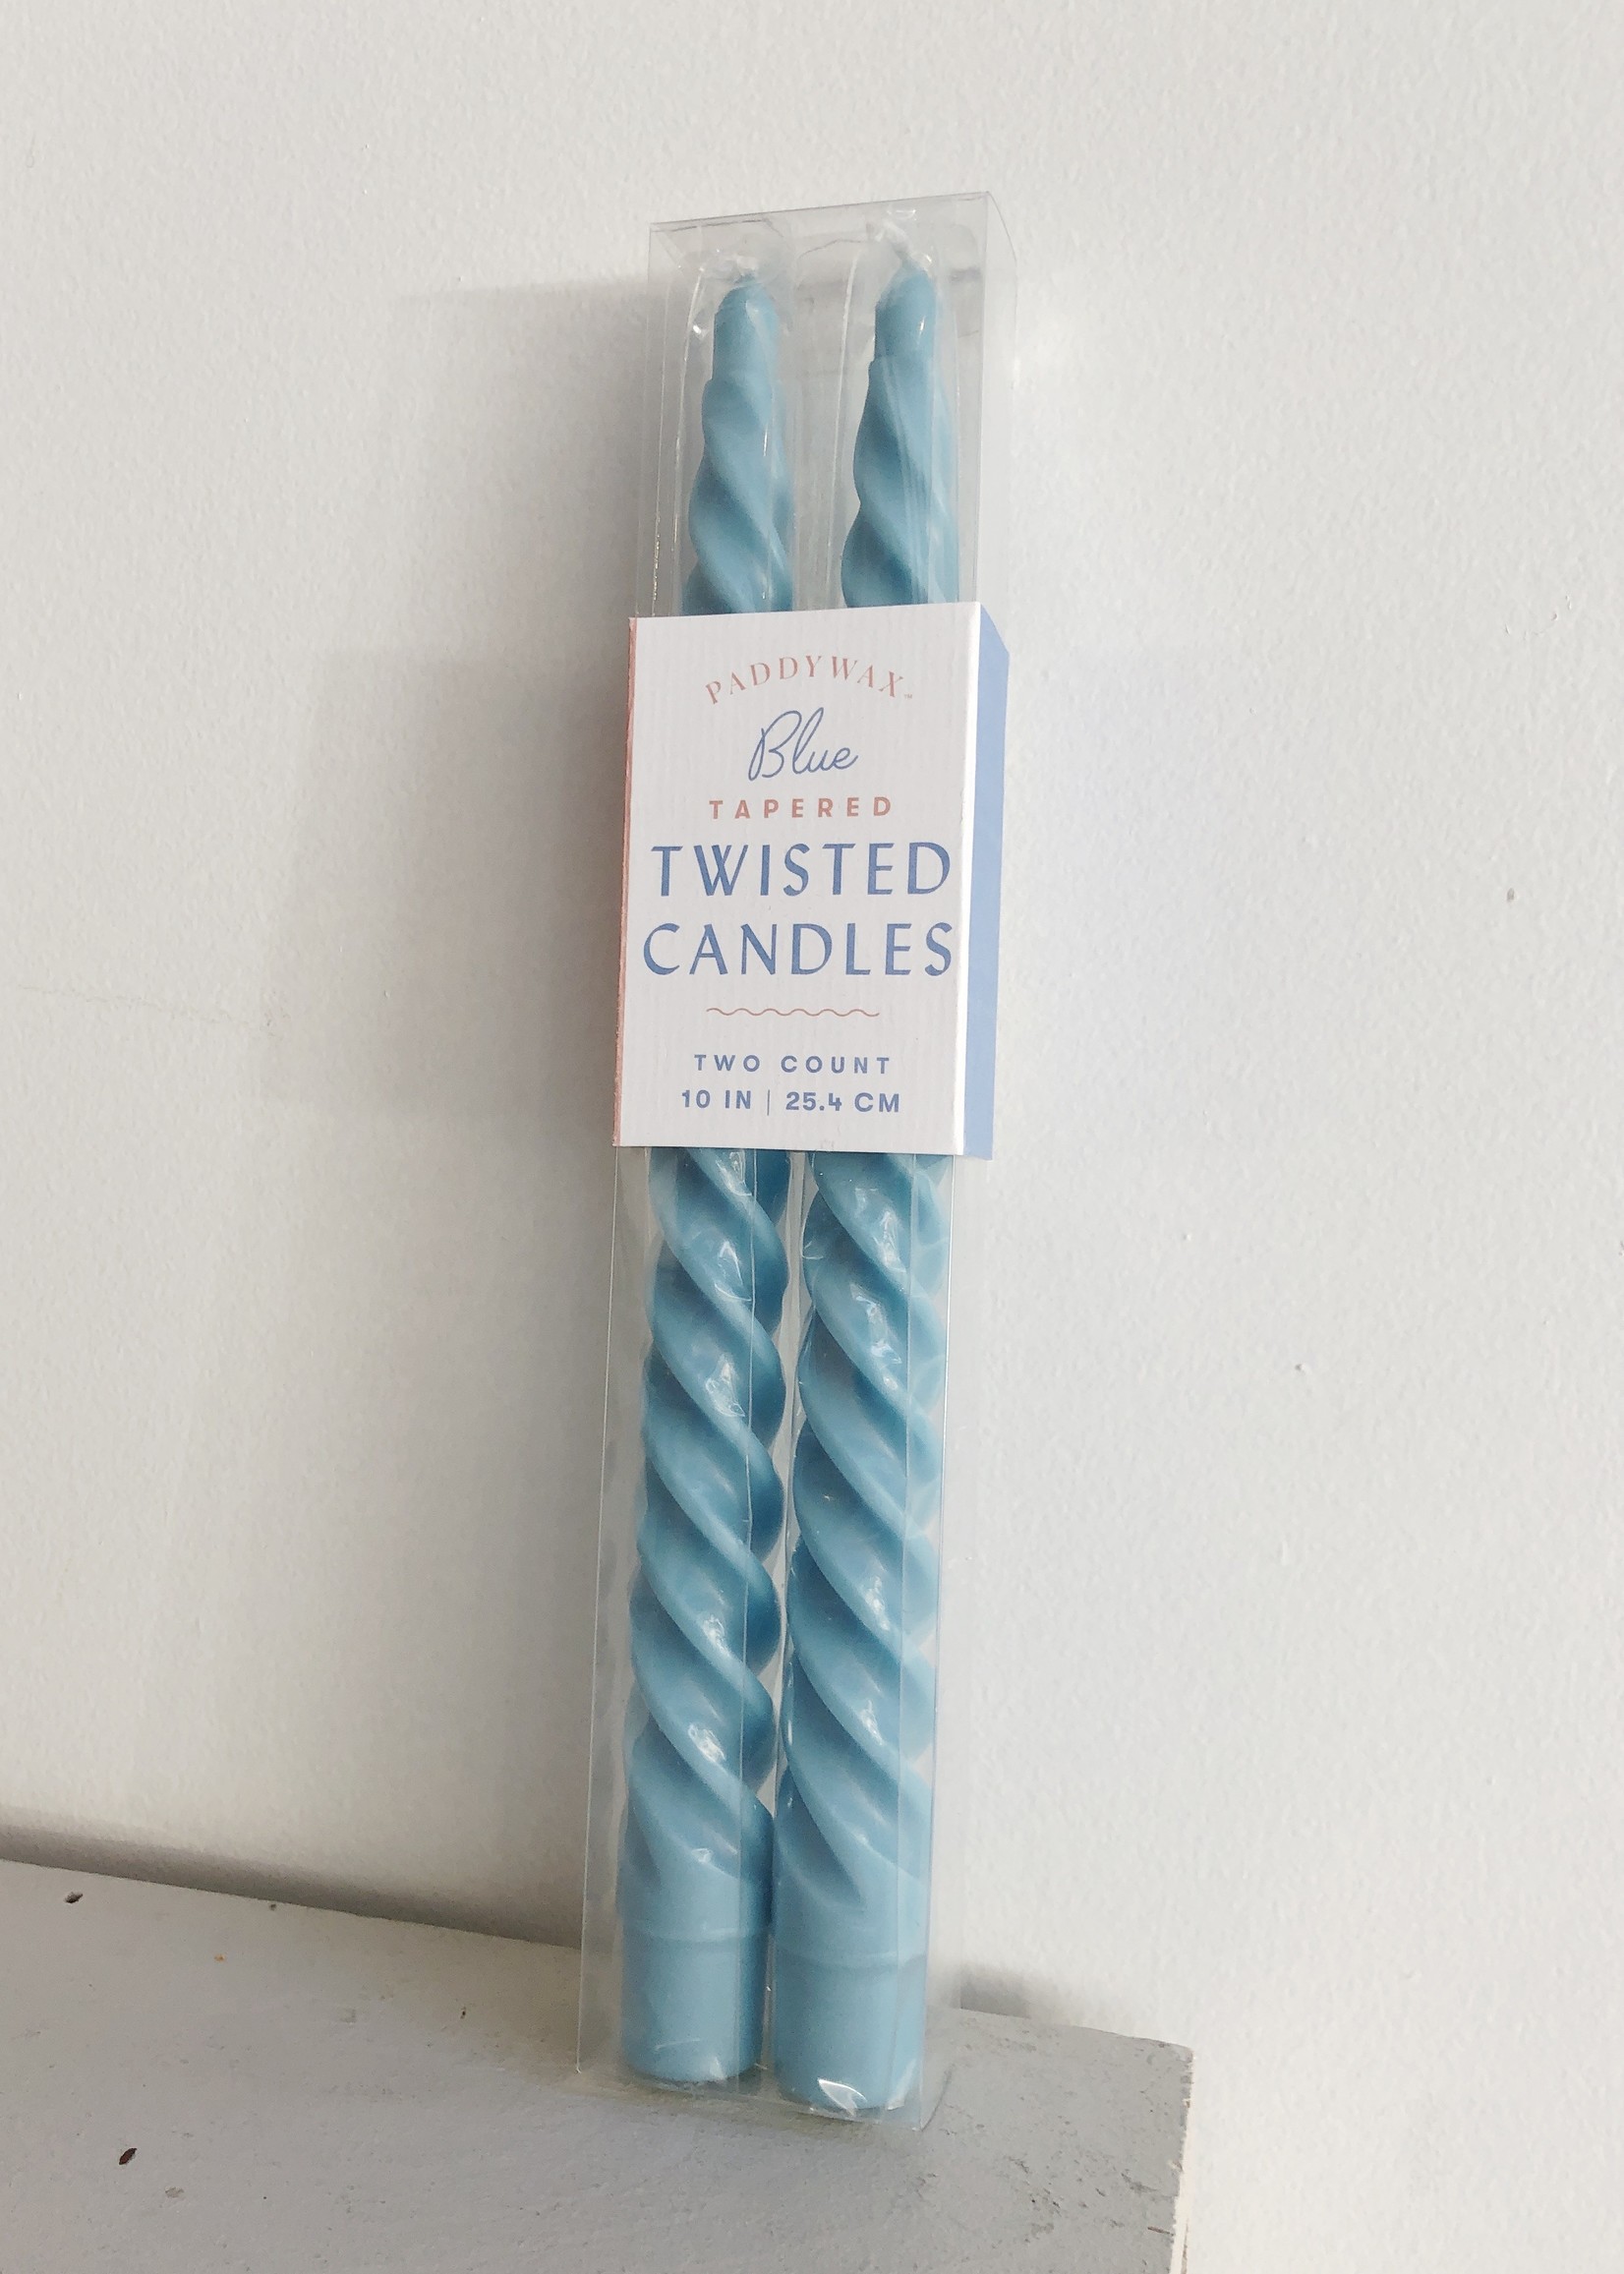 Paddywax Twisted Candles Pair by Paddywax